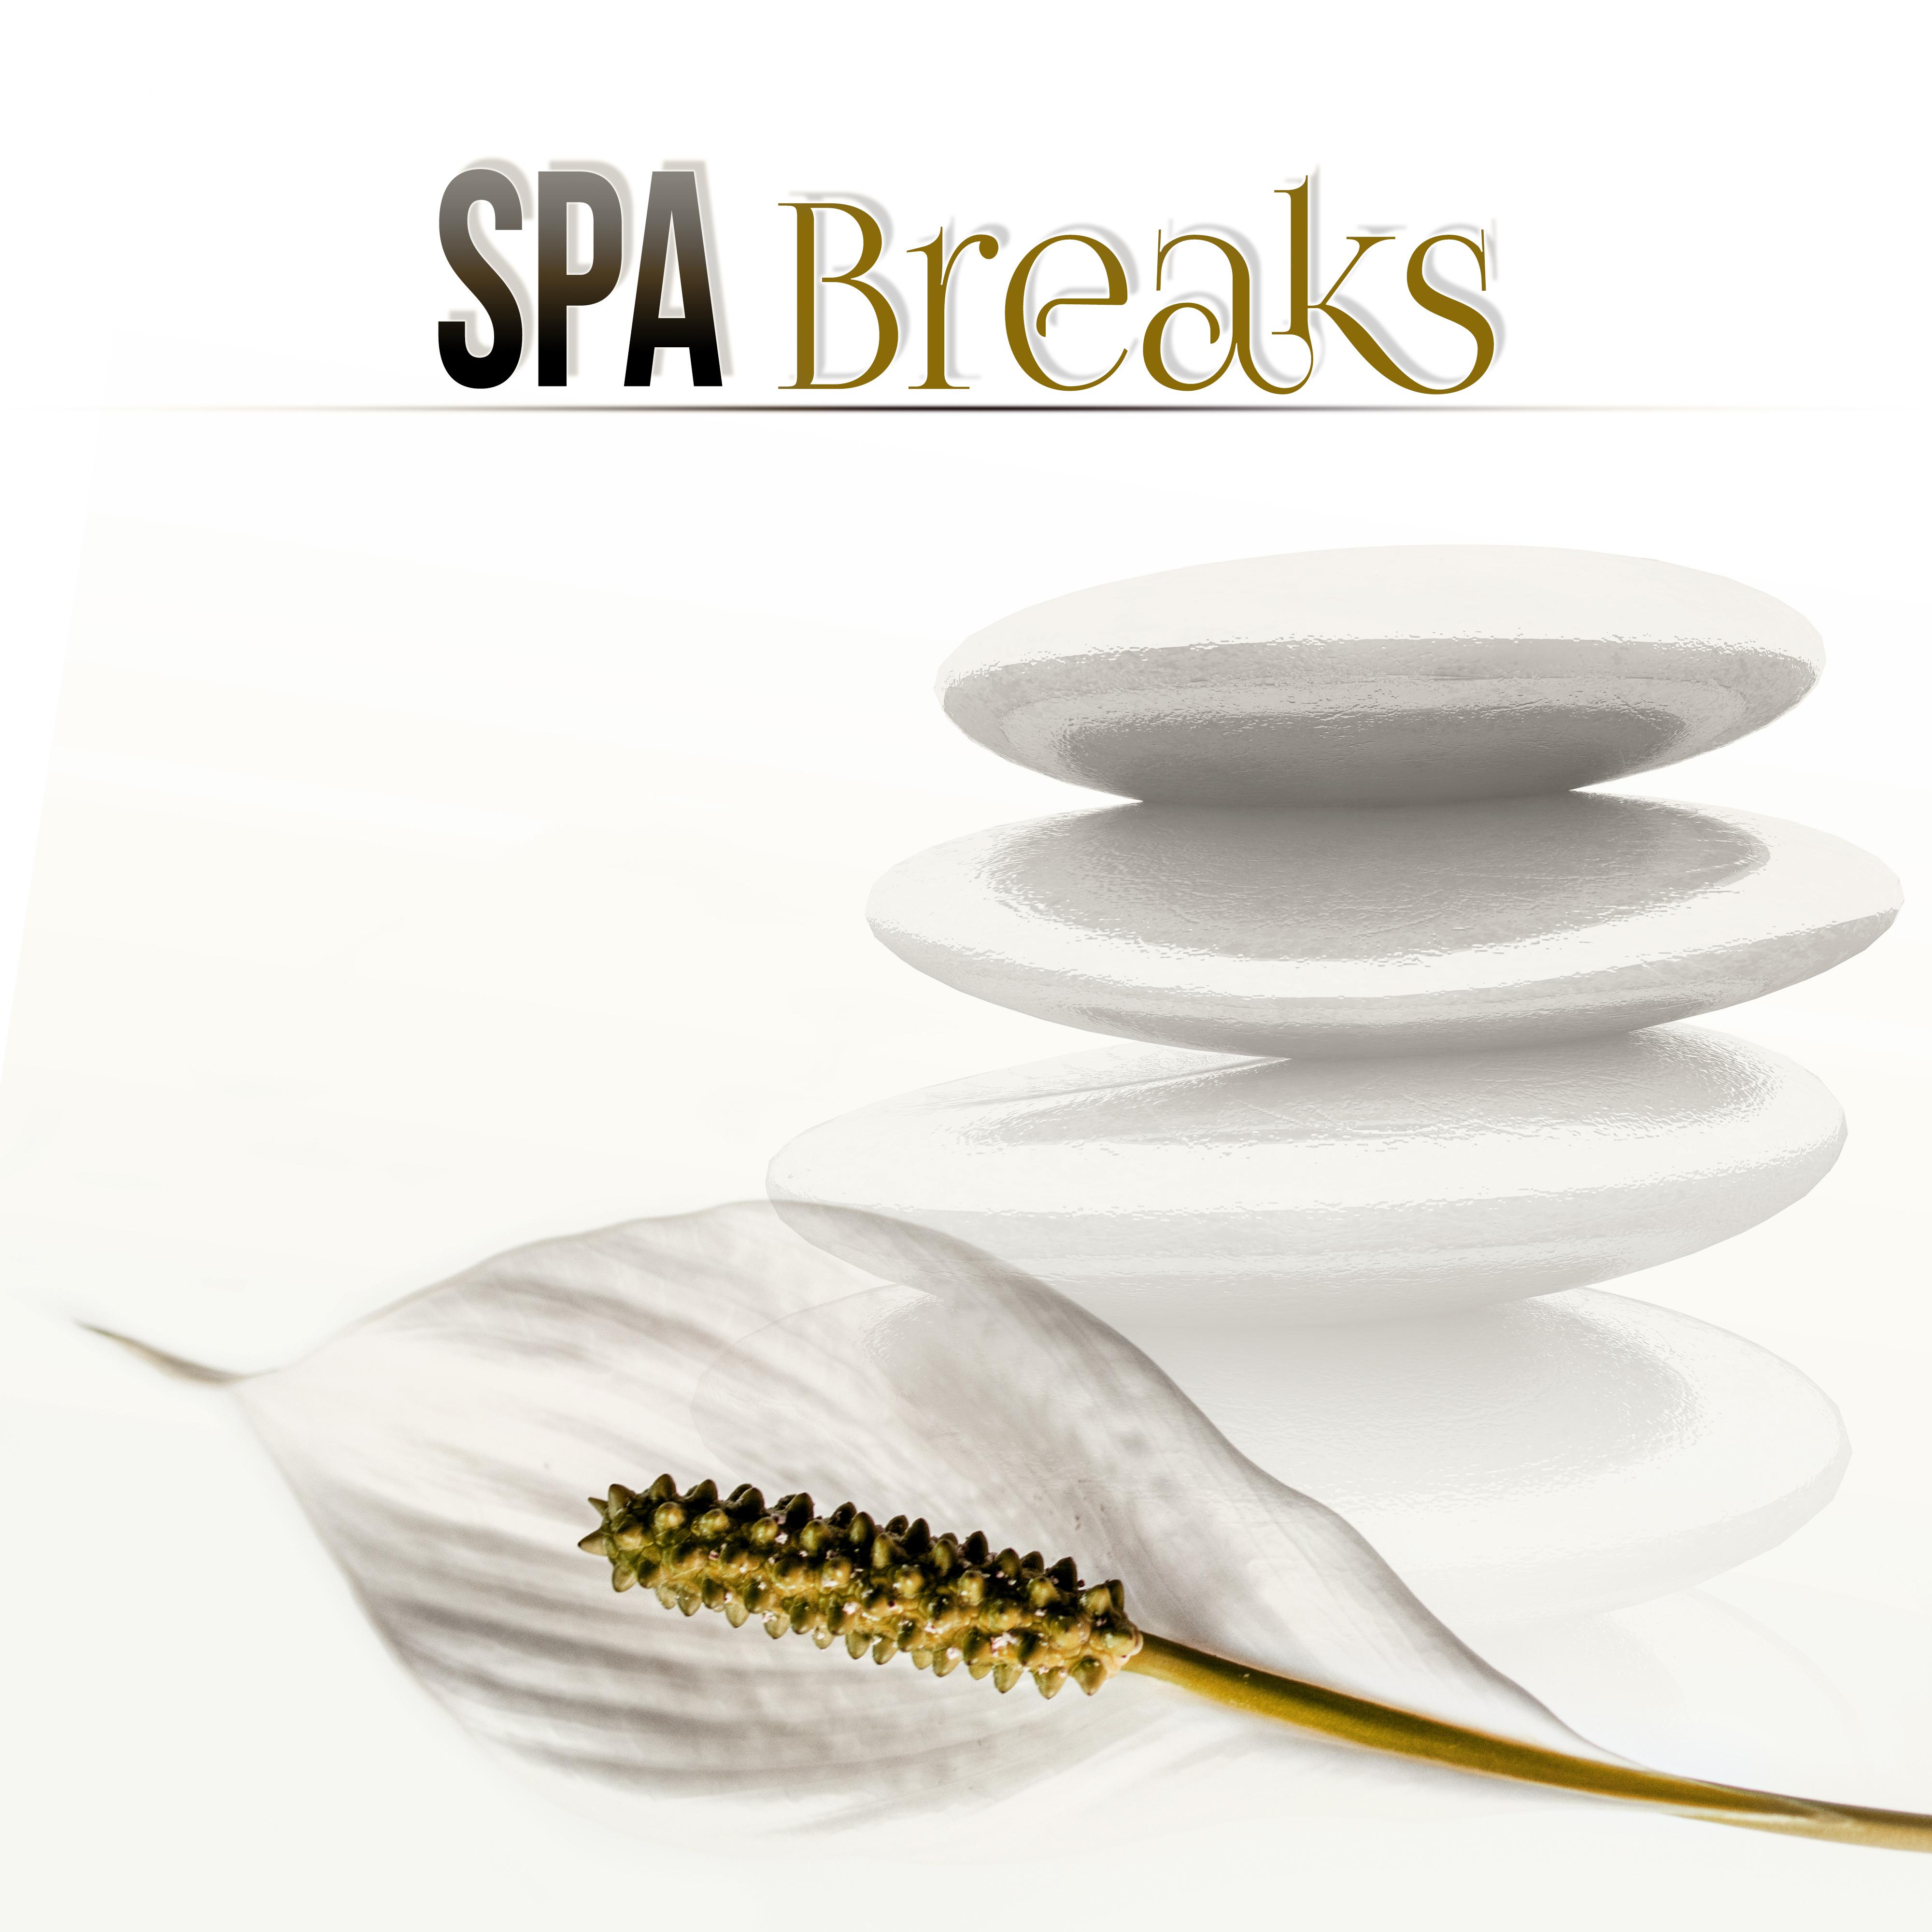 Spa Breaks  New Age Music for Beauty Salon and Spa, Relaxation, Massage, Acupressure, Aromatherapy, Beautiful and Healthy Body, Healing Power, Well Being, Rest After Work with Nature Sounds